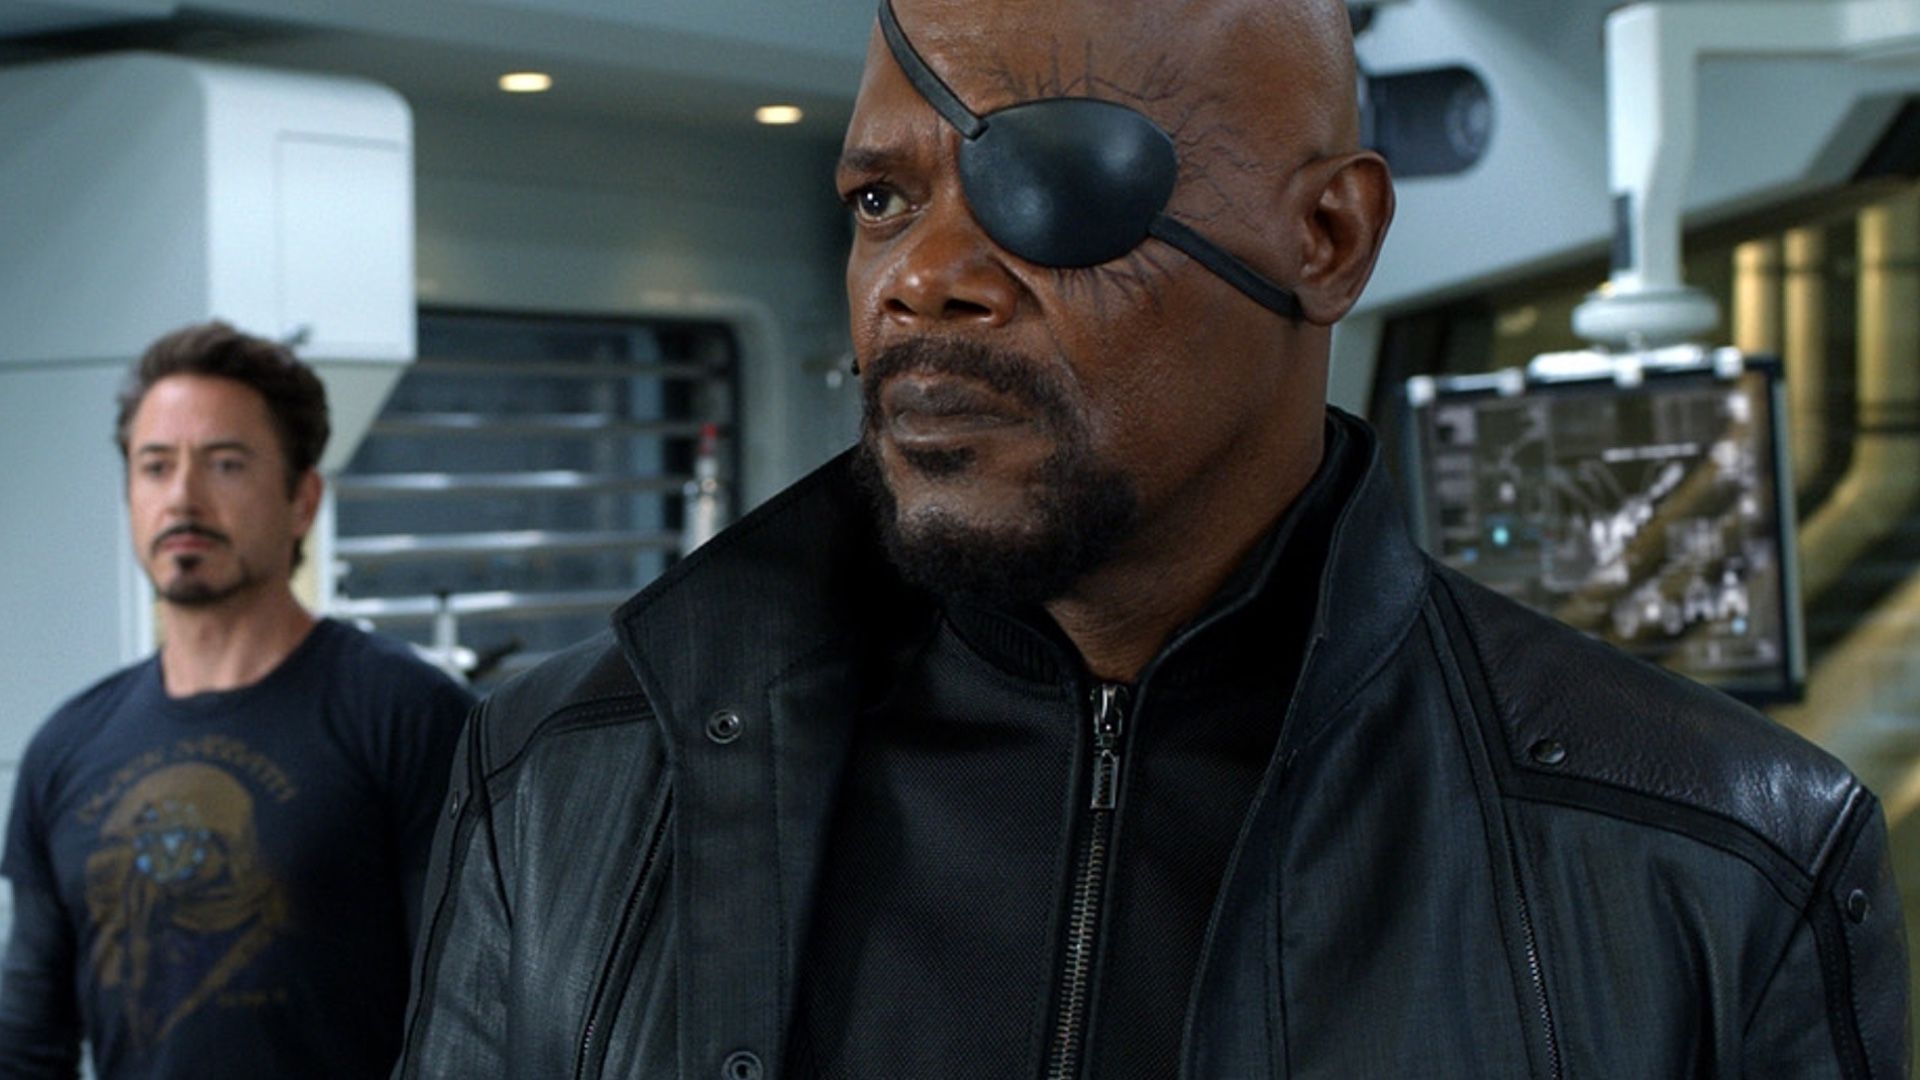 Samuel L. Jackson as Nick Fury in the Avengers